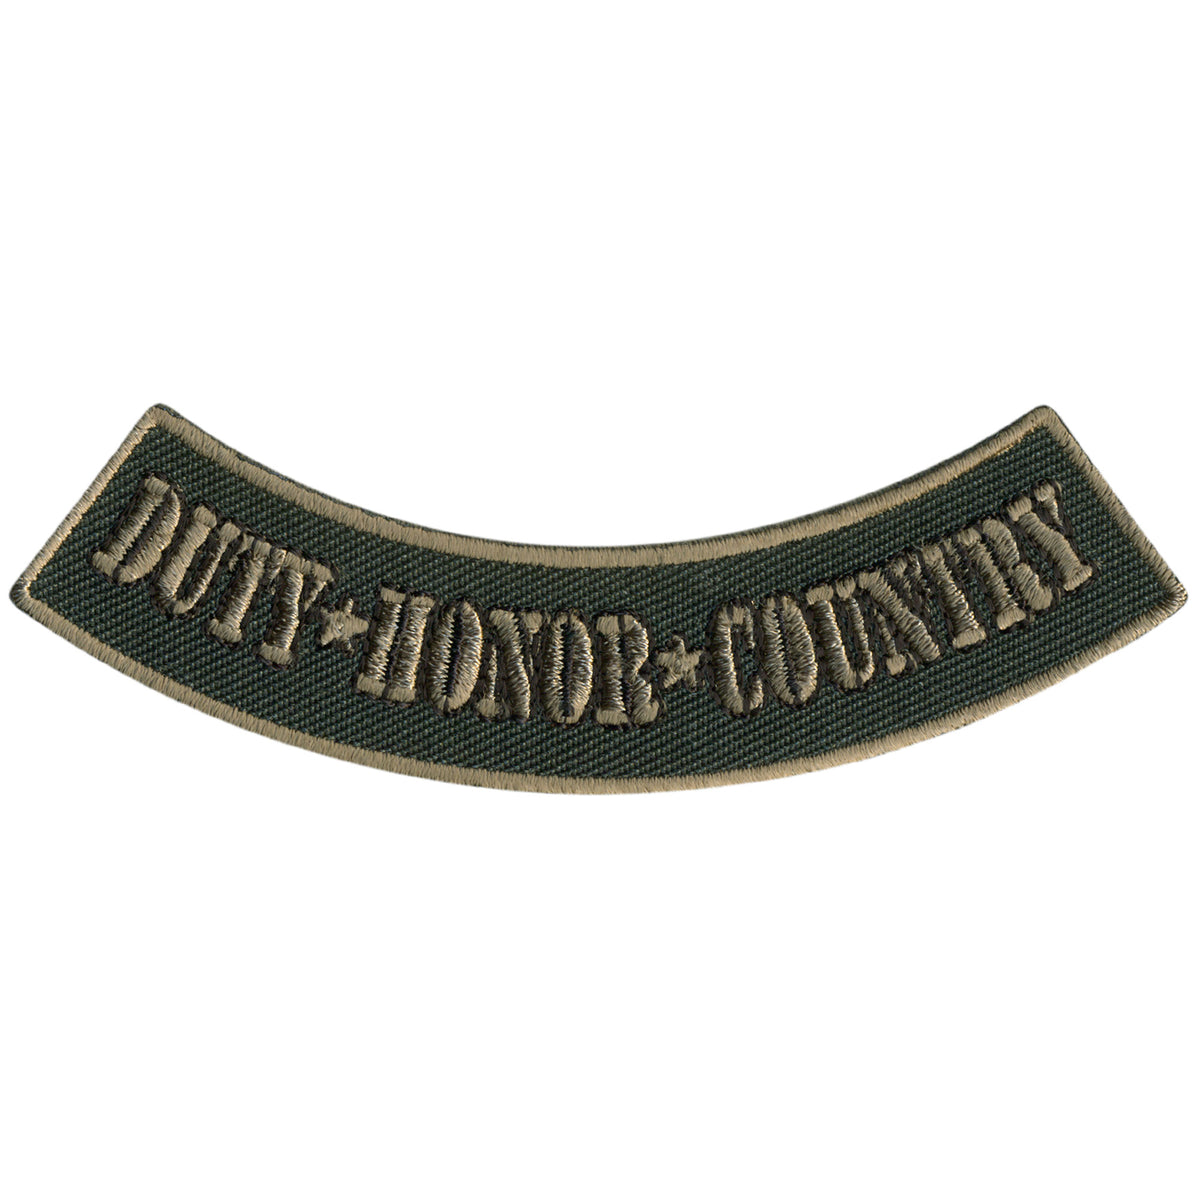 Hot Leathers Duty Honor Country 4” X 1” Bottom Rocker Patch